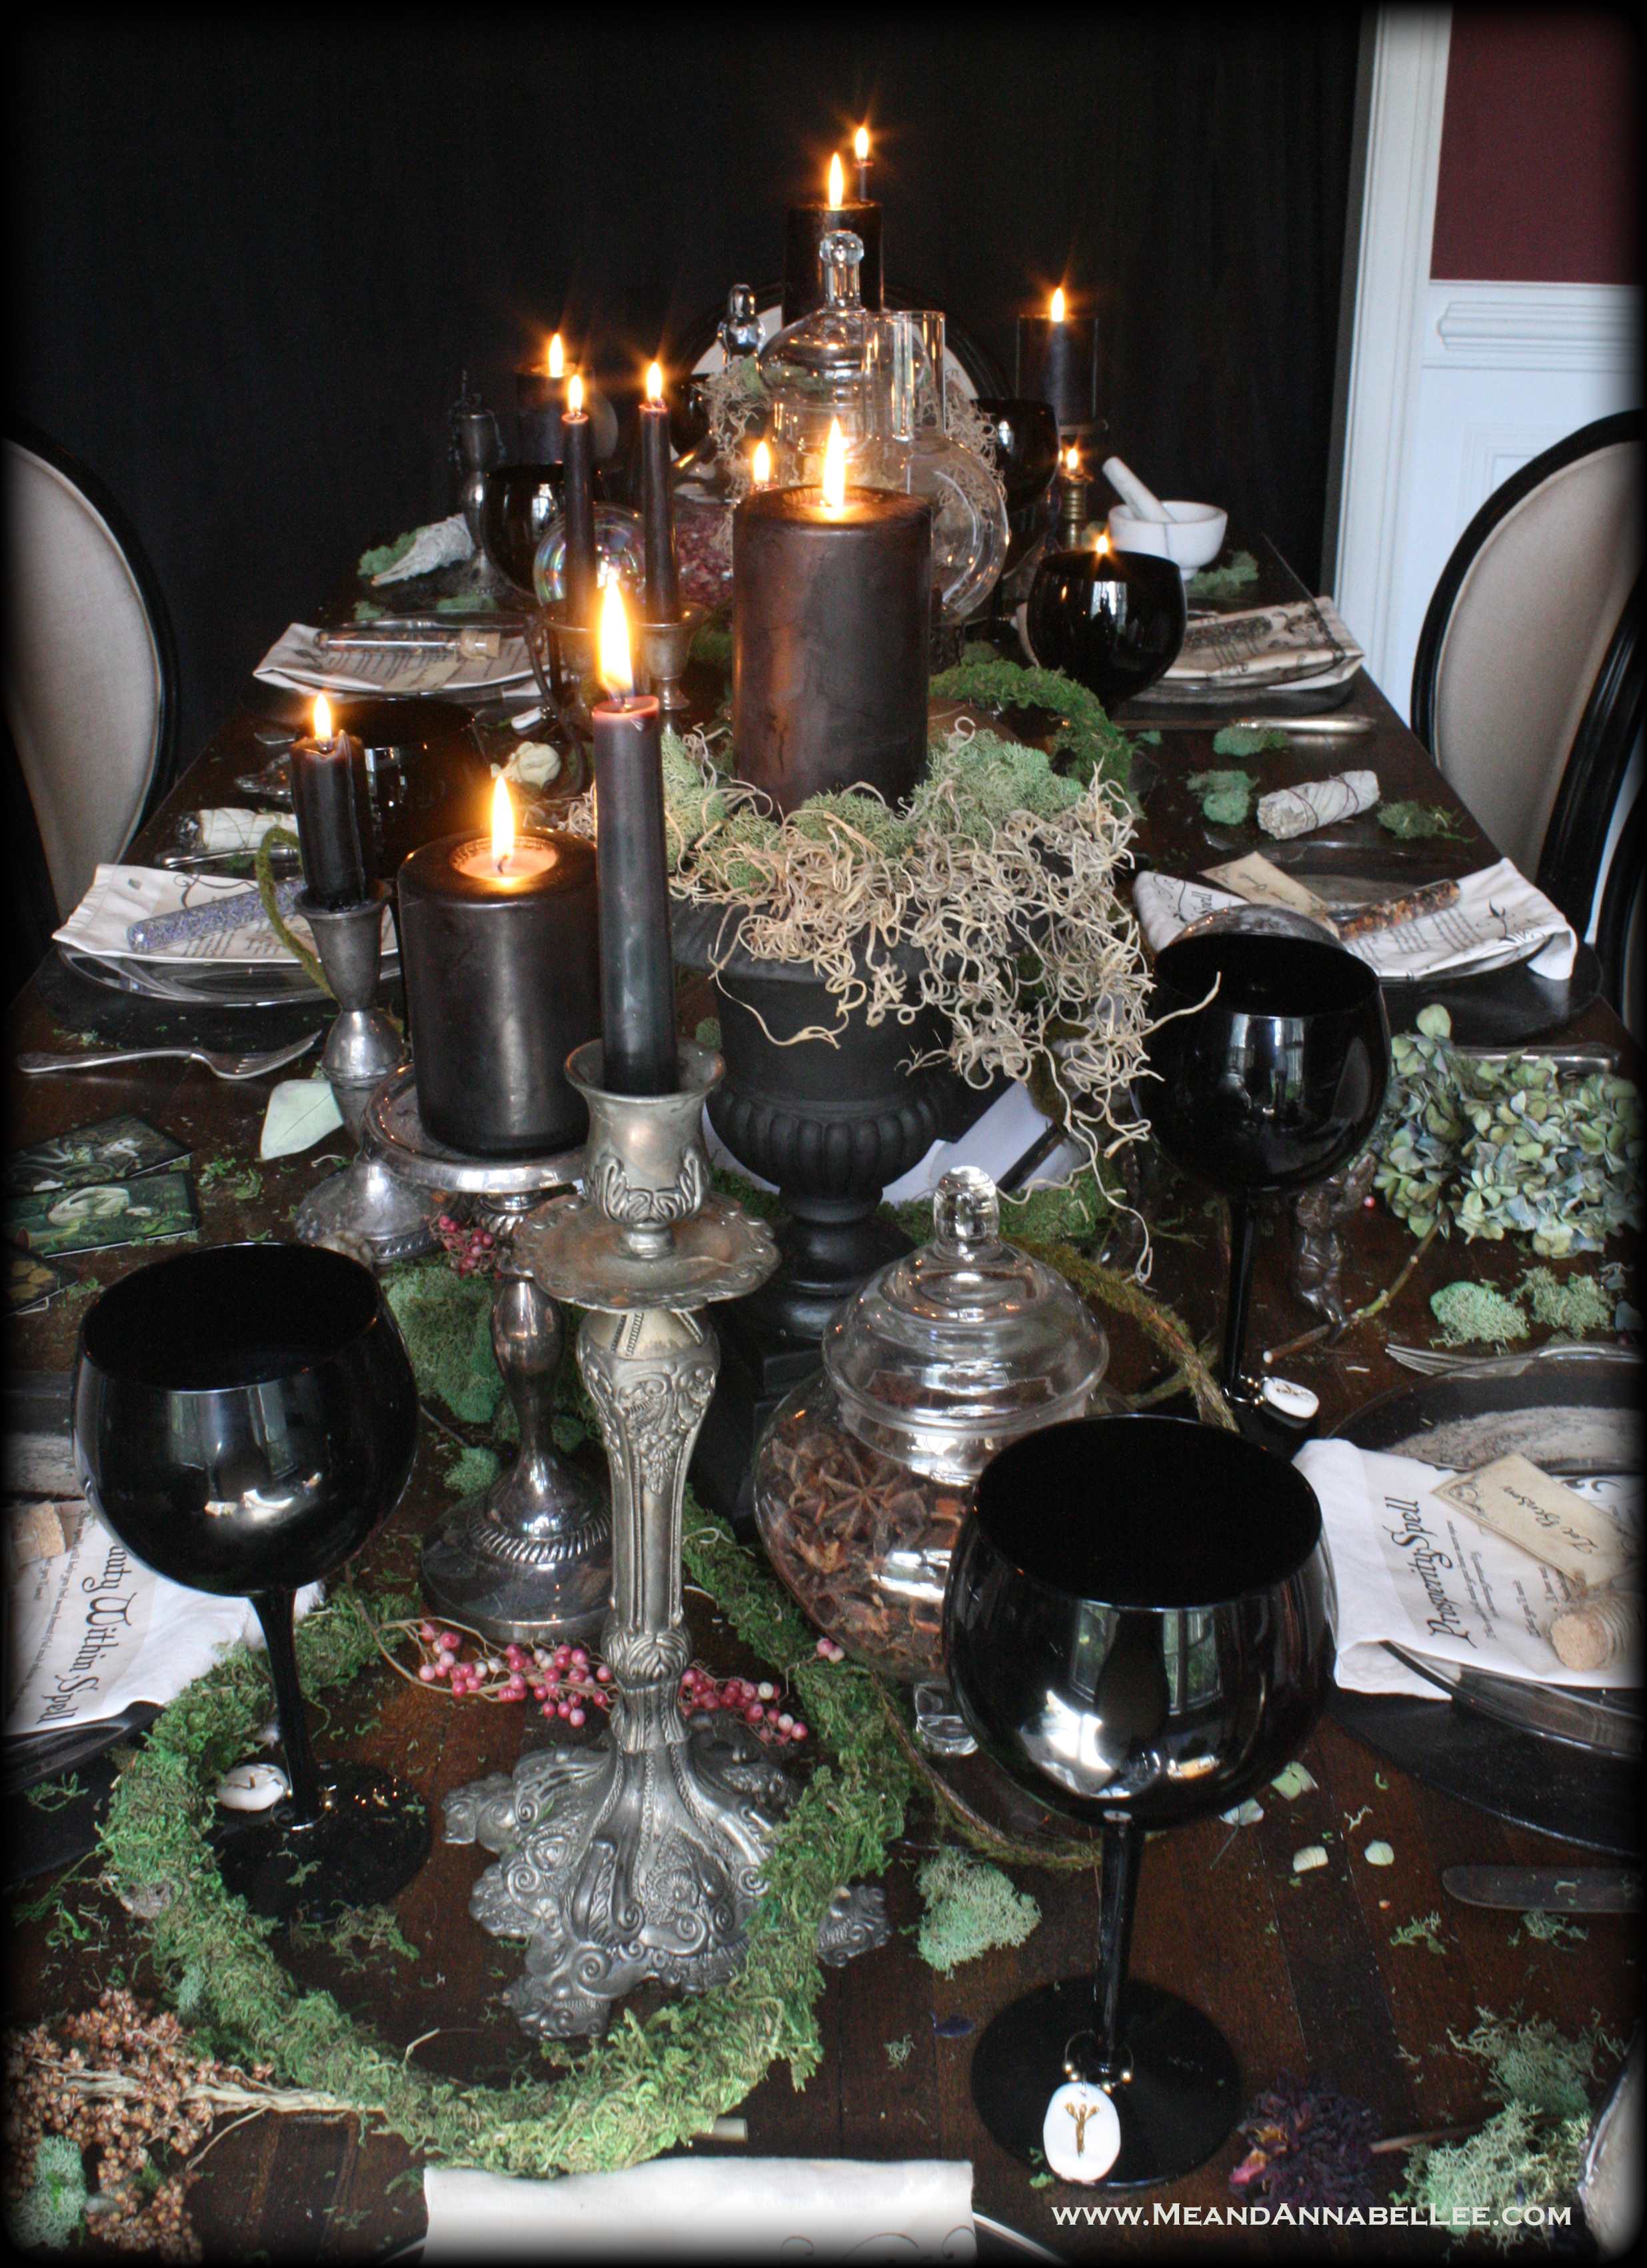 Witches Dinner Party | Elegant Gothic Halloween Table Decor | Candlelit Dinner | Dark & Moody Ambience |Crystal Balls | Apothecary Jars | Spell Napkins | Rune Stone Wine Charms | Antique Candle Holders | Skull Centerpiece | Black Candles | Enchanted Forest | Goth Home Décor | Samhain Feast Menu | www.MeandAnnabelLee.com